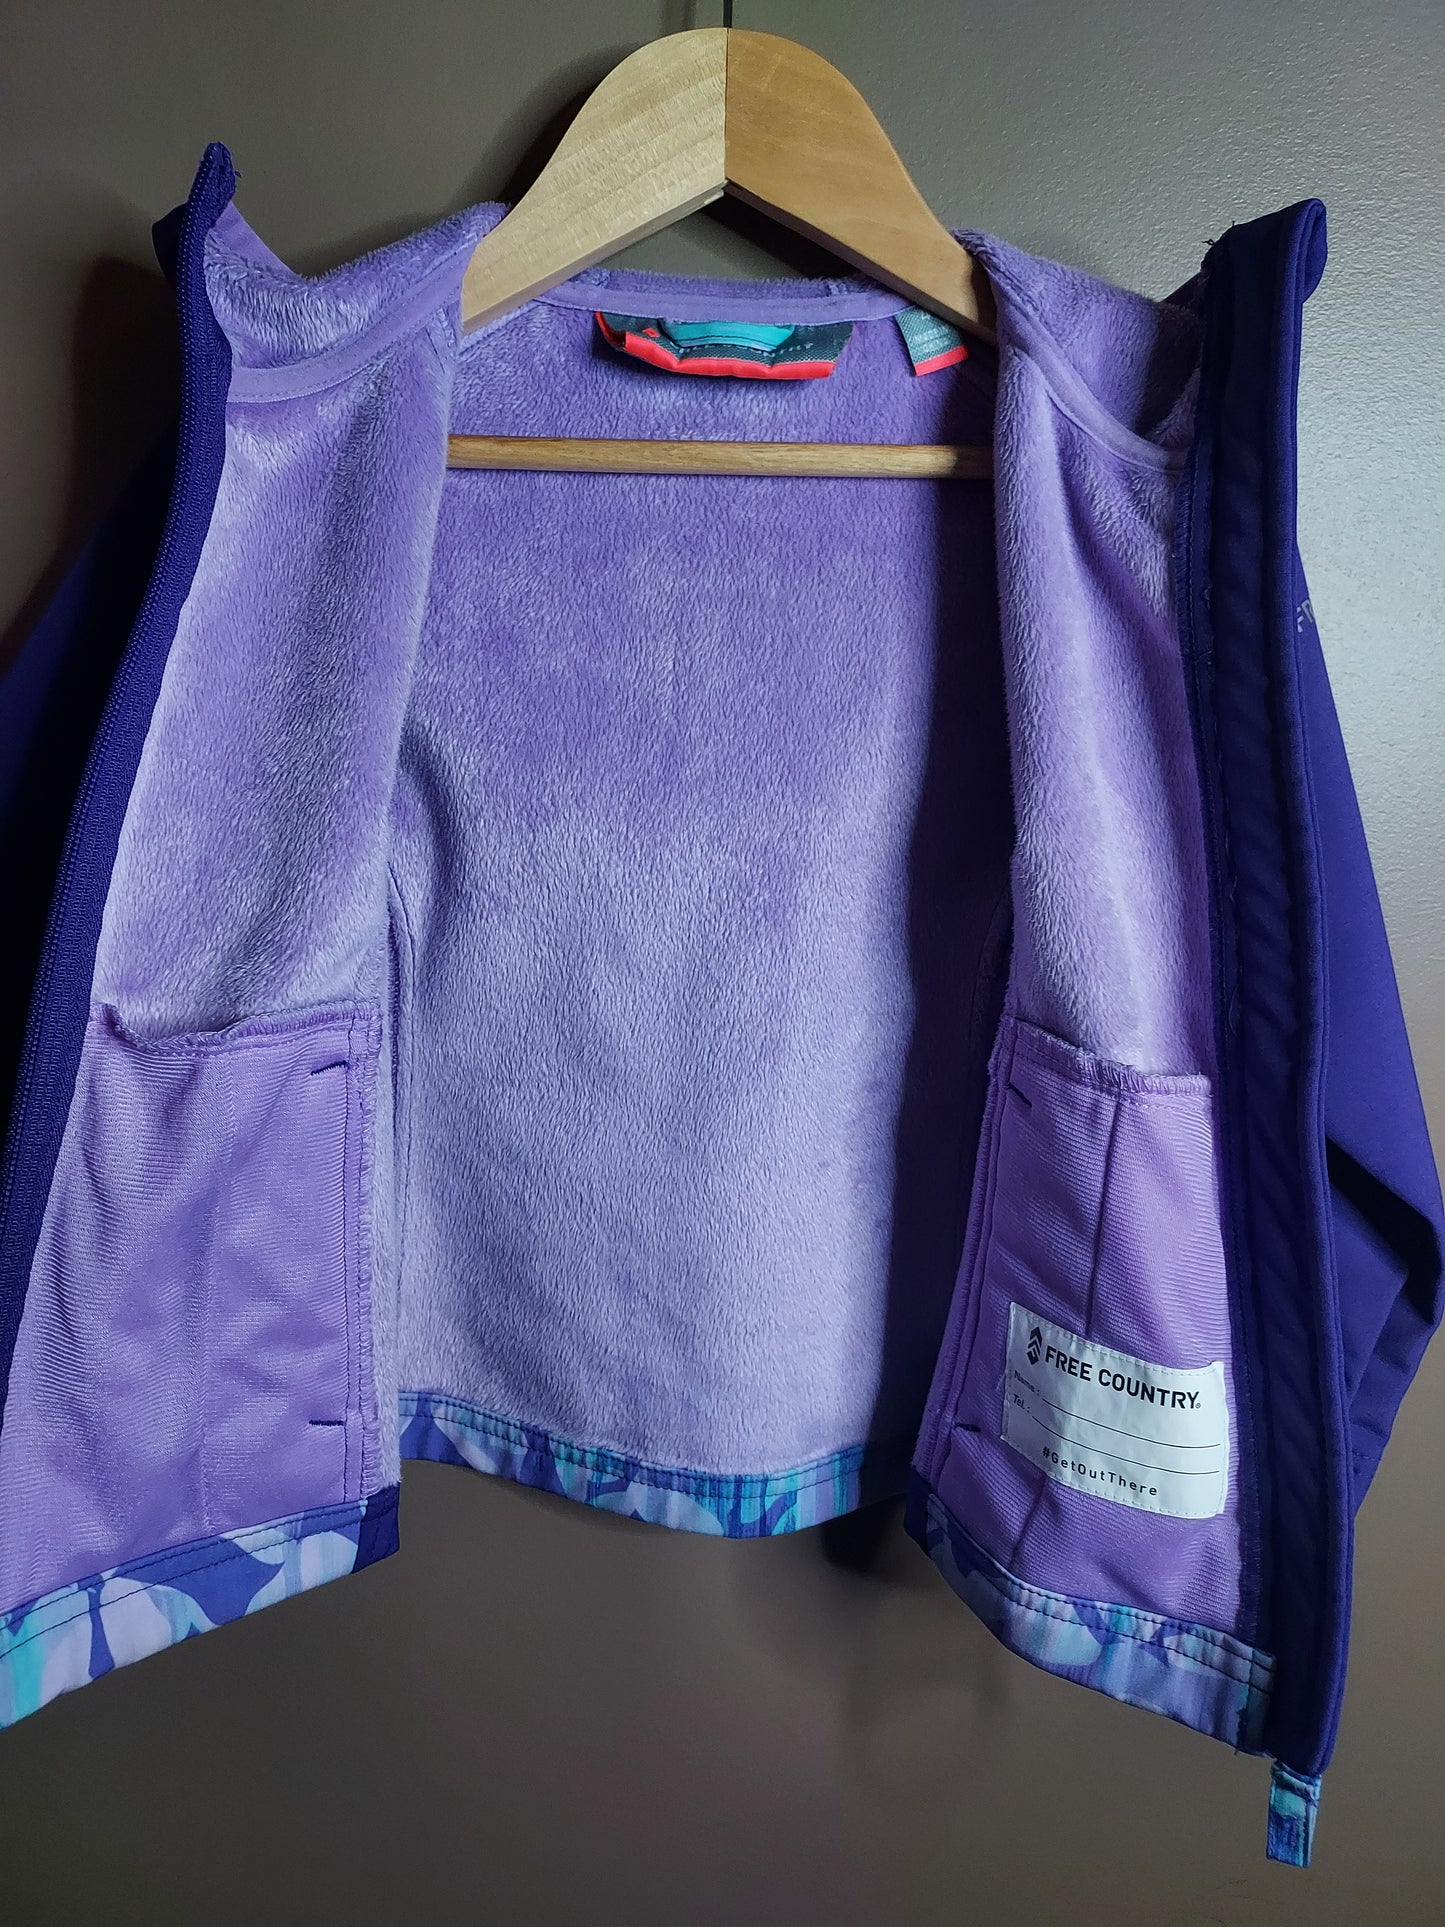 Free Country Purple Jacket NEW CONDITION Size 4T – The Shoreline Attic